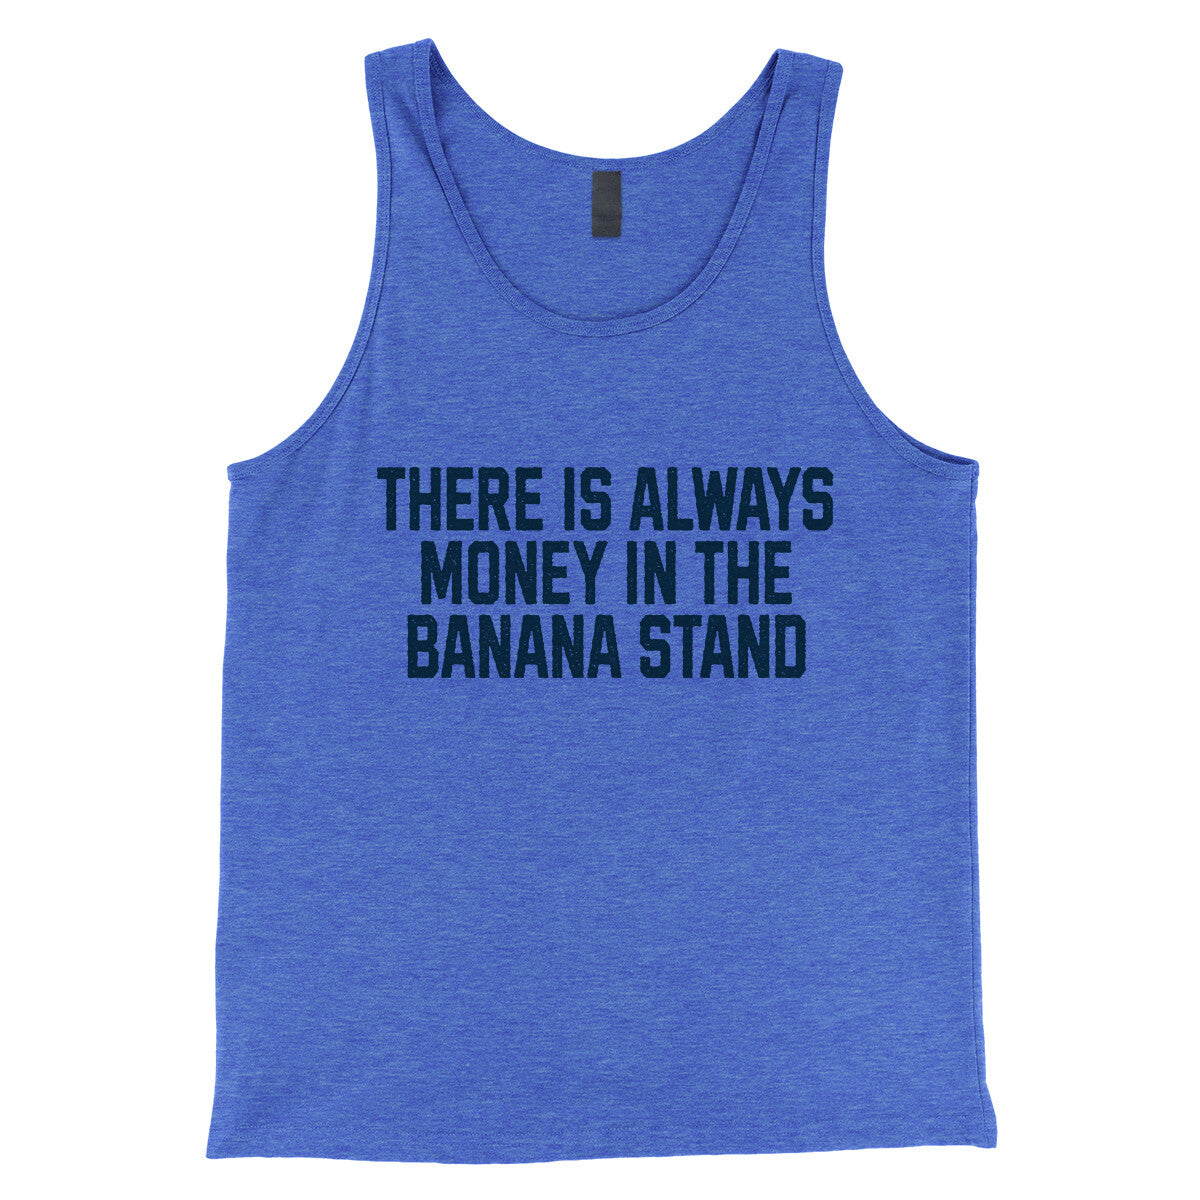 There is Always Money in the Banana Stand in True Royal TriBlend Color